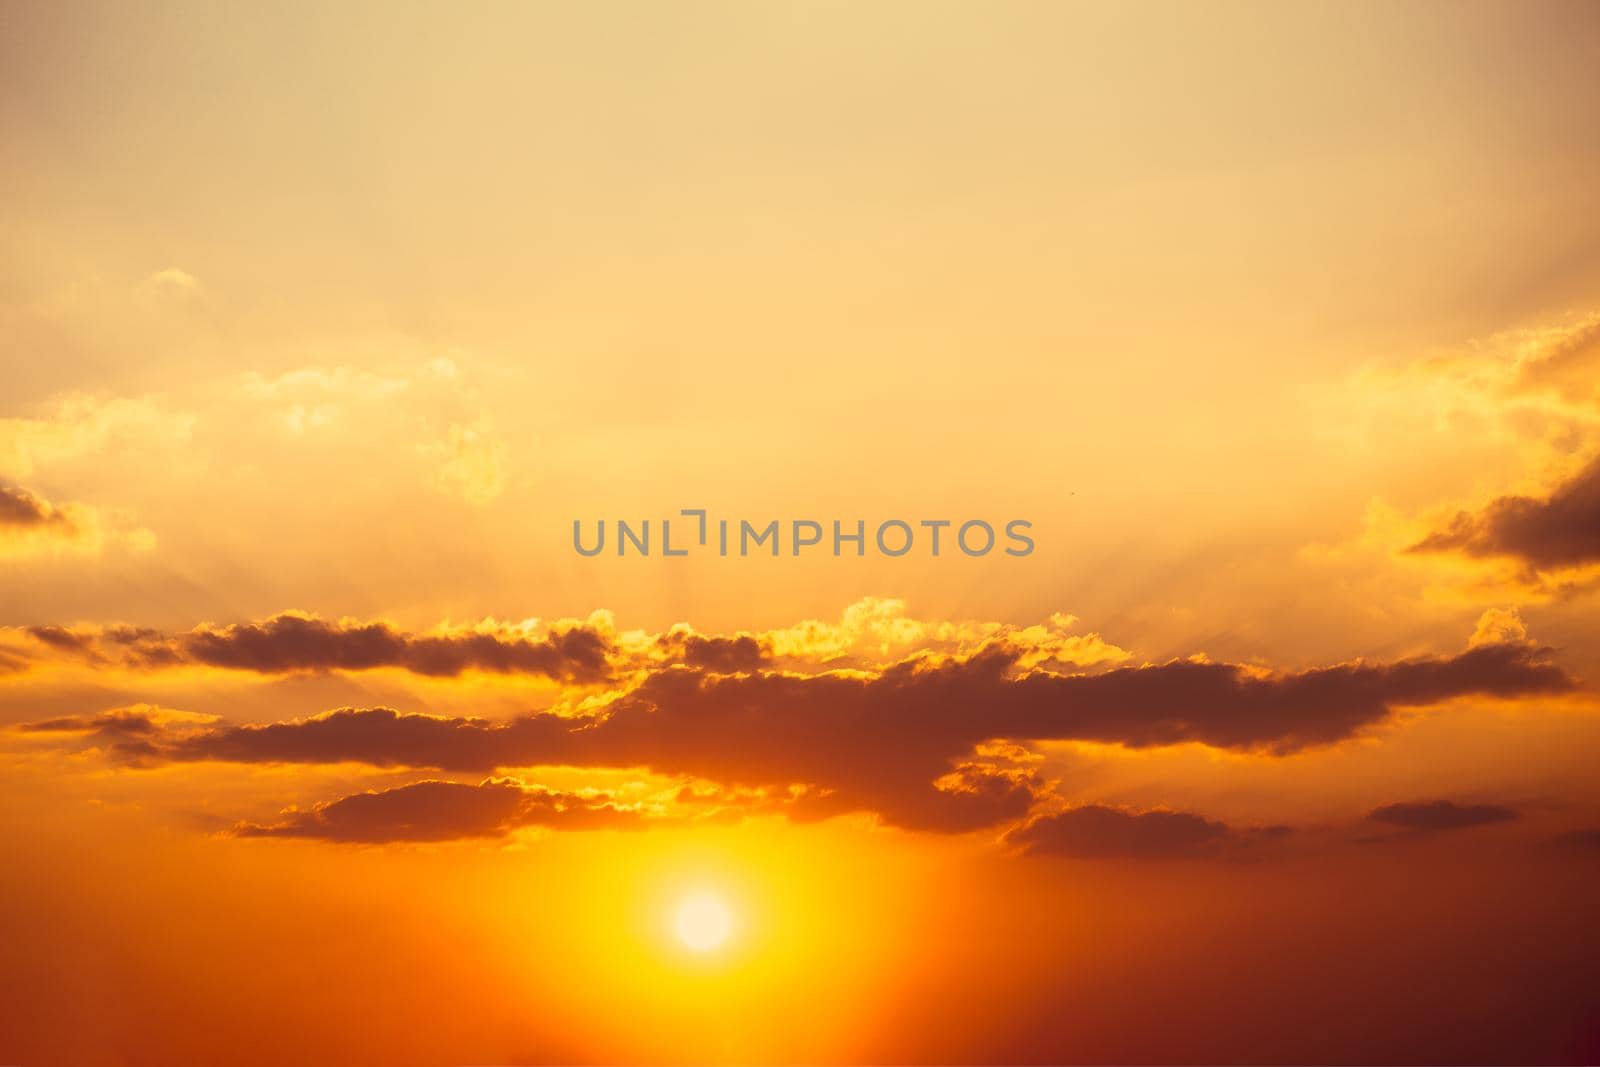 beautiful perfect red hot summer sky sunset dusk or dawn photo image picture for nature skyscape background wallpaper by qualitystocks